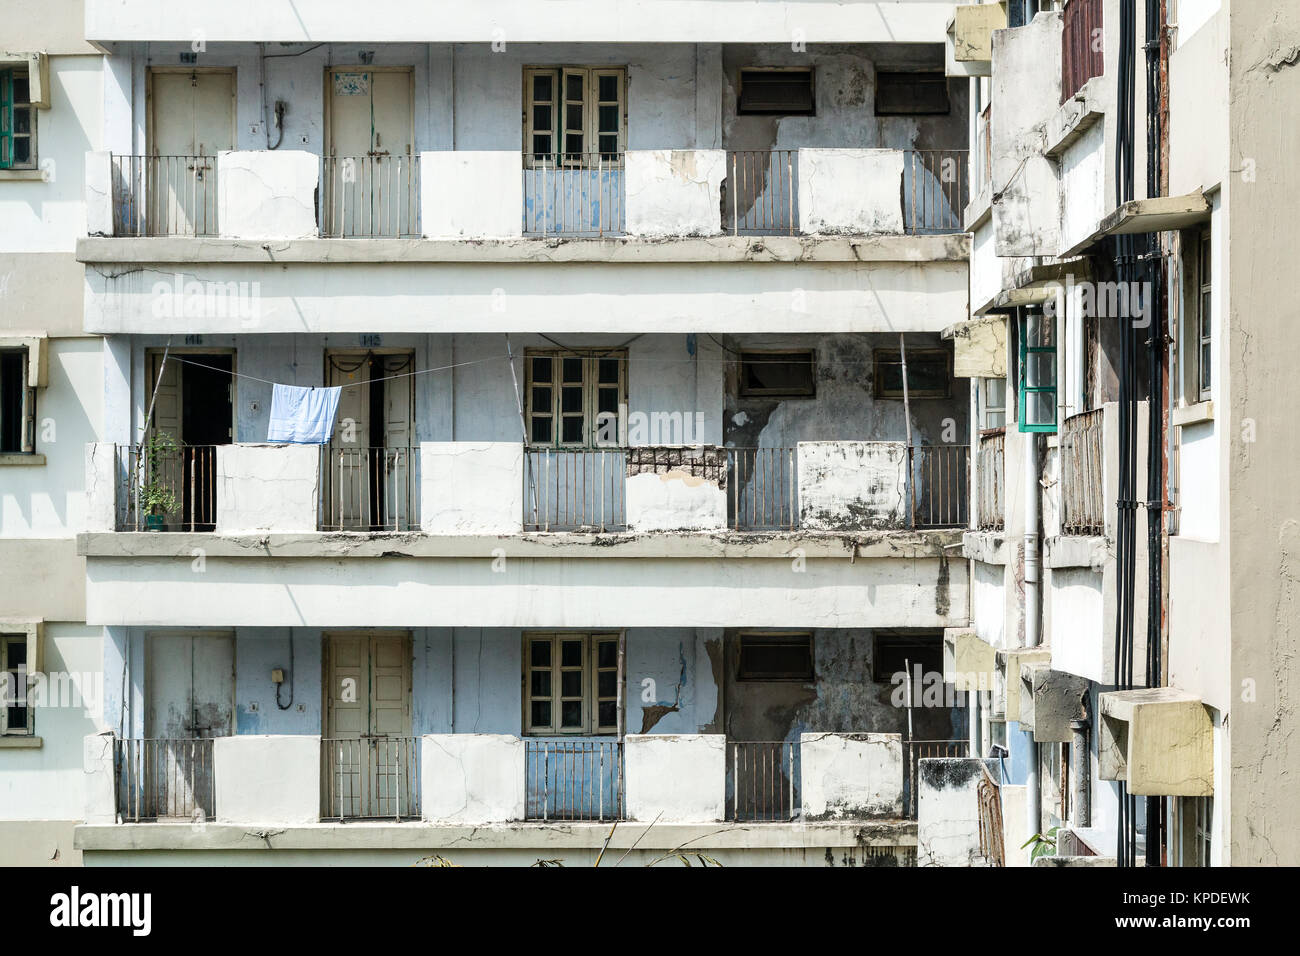 Derelict appartments in Calcutta (Kolkata) India.  Towel hanging outside shows they are still in use Stock Photo